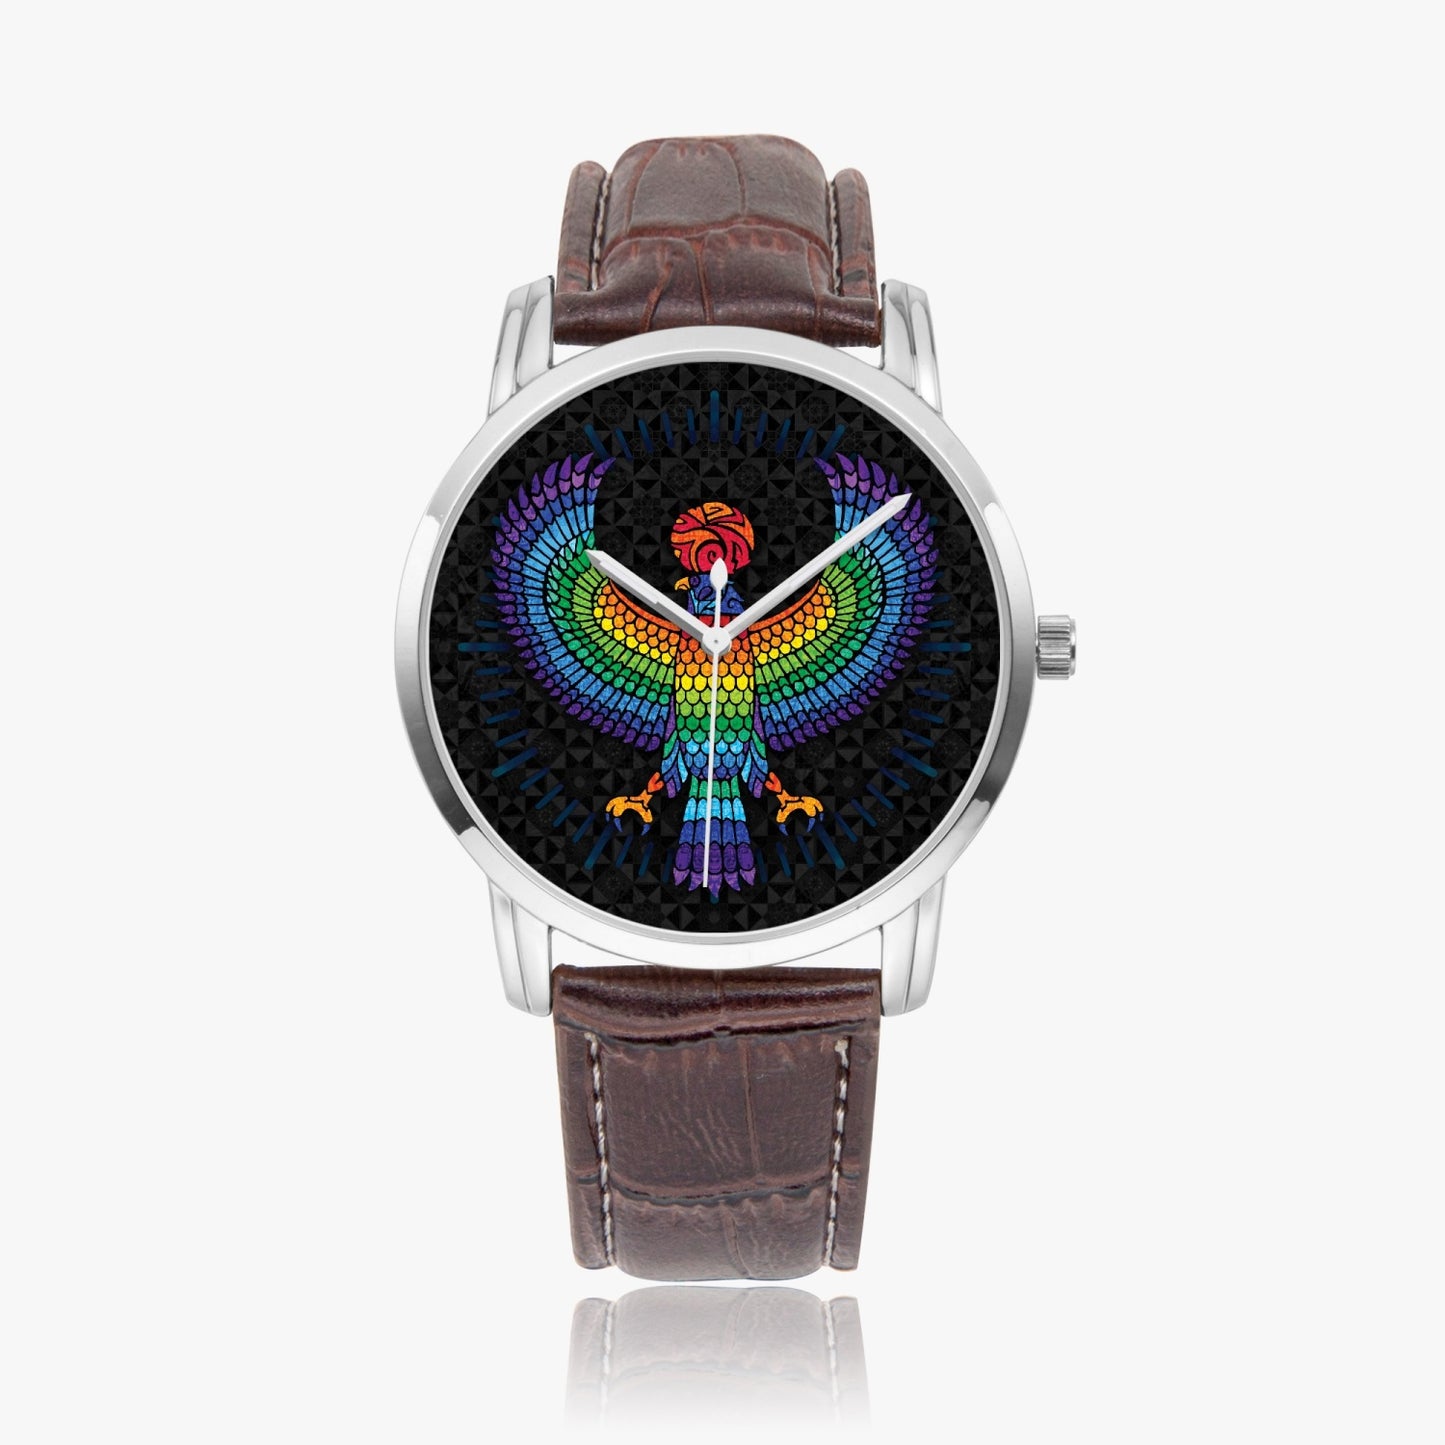 Eagle of Horus Stainless Steel Quartz watch w/ Genuine Leather Strap